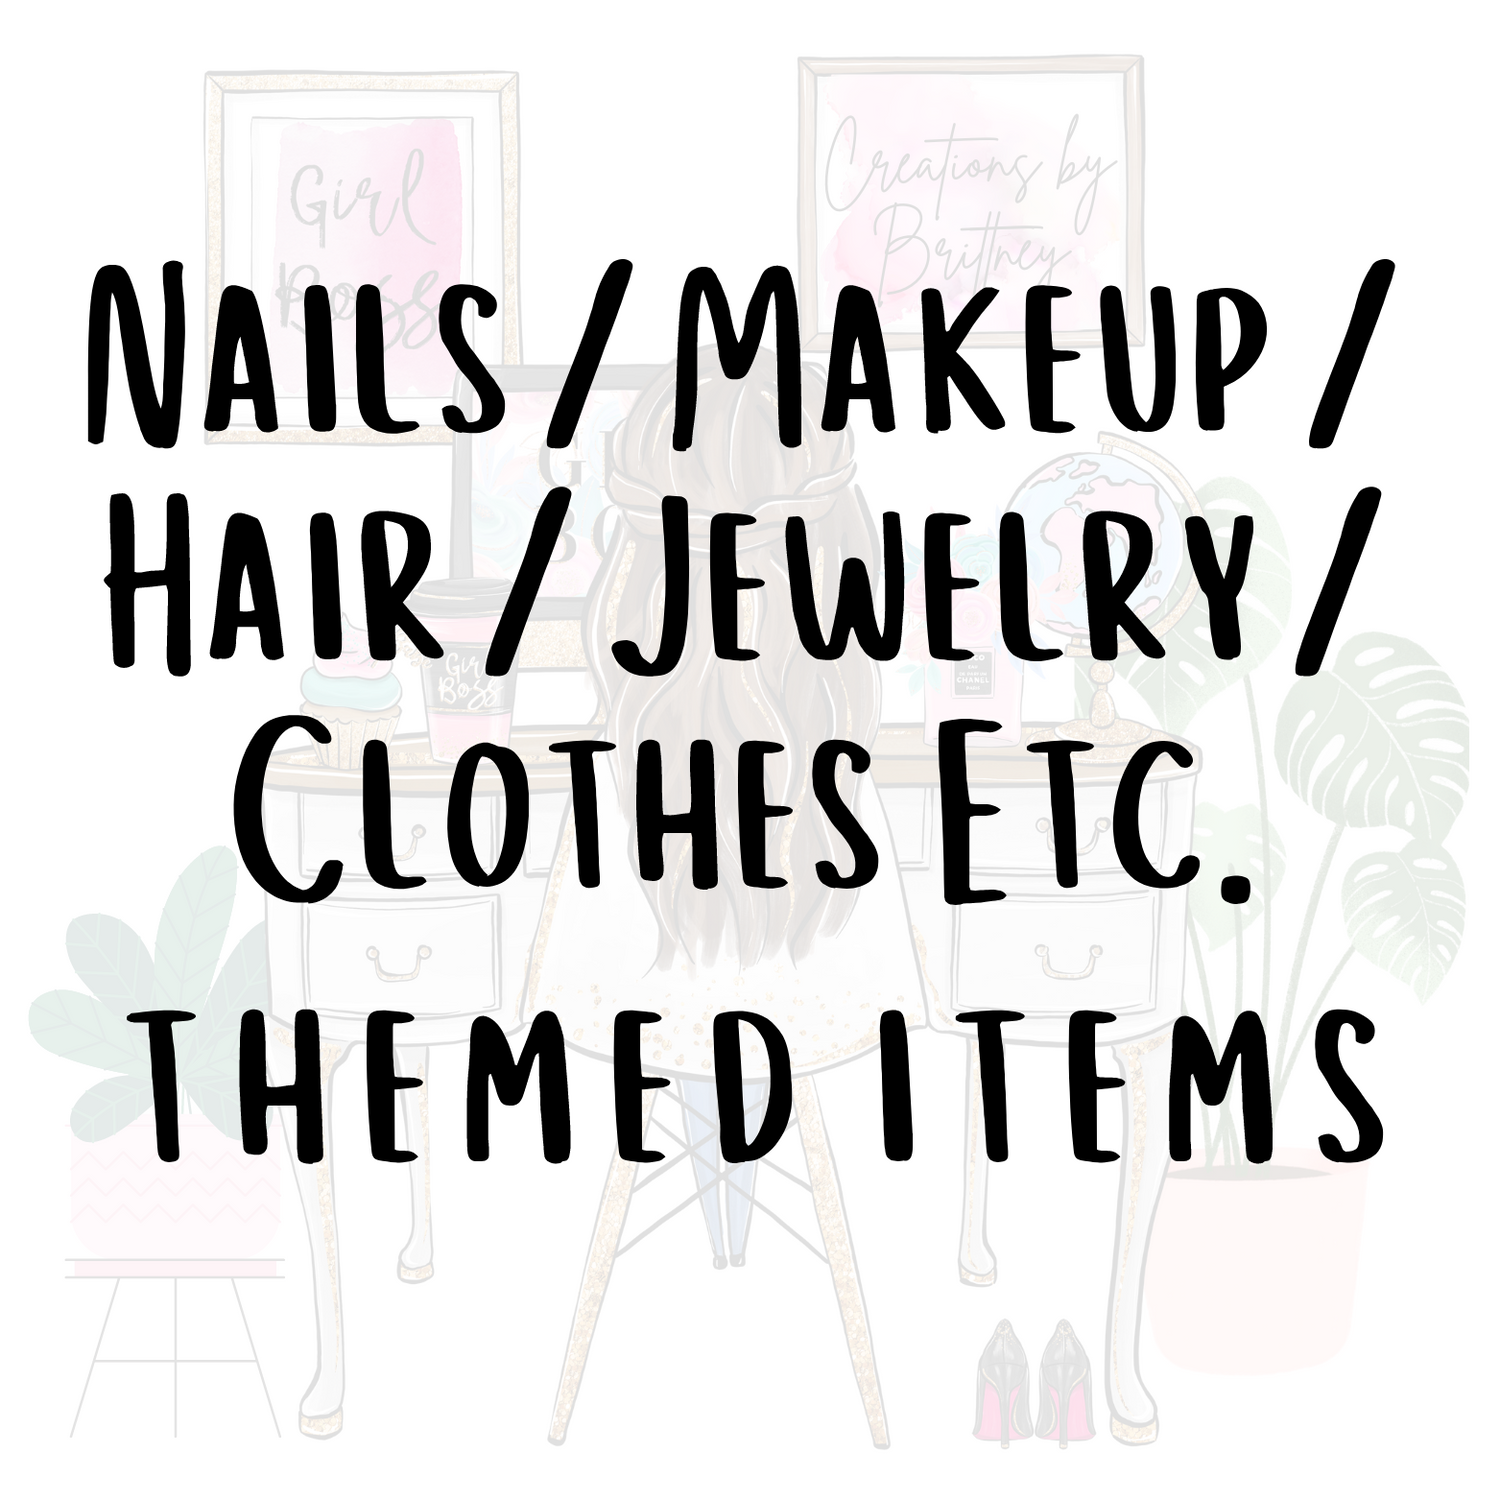 Nails / Makeup / Hair / Jewelry / Clothes Etc.